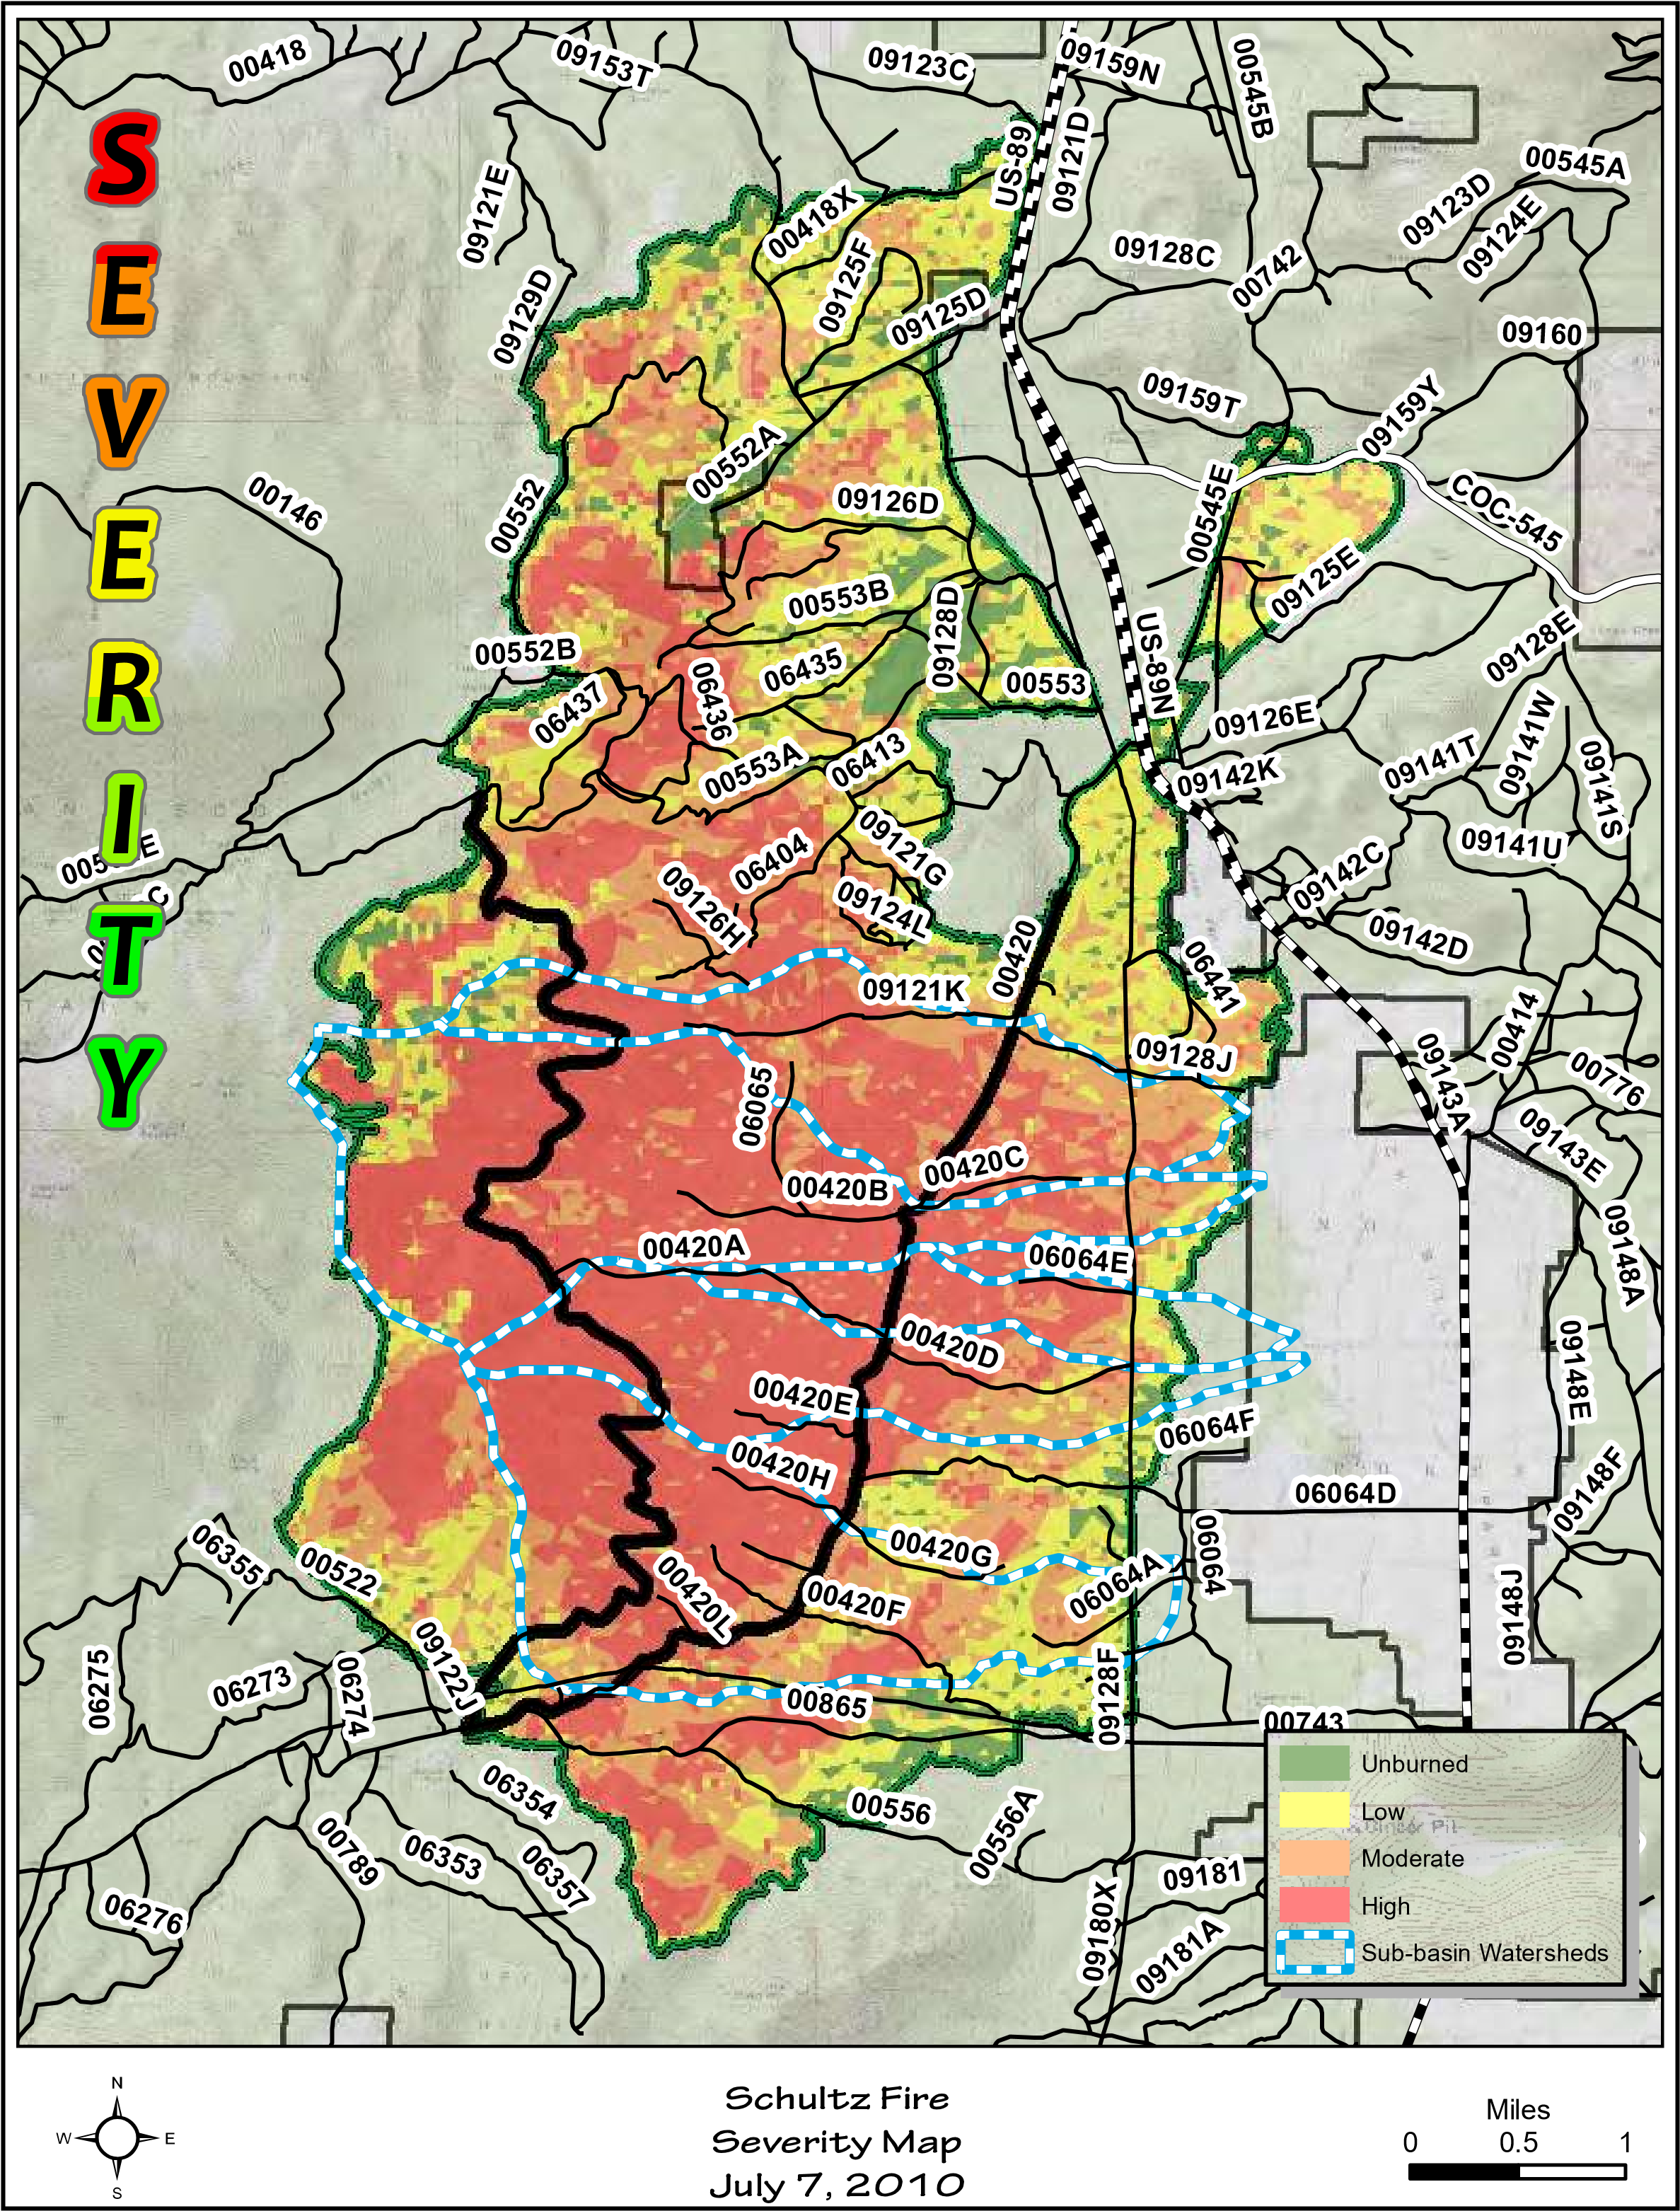 Map of the Schultz Fire burn scar area where heavy rainfall occurred on July 20th, 2010.